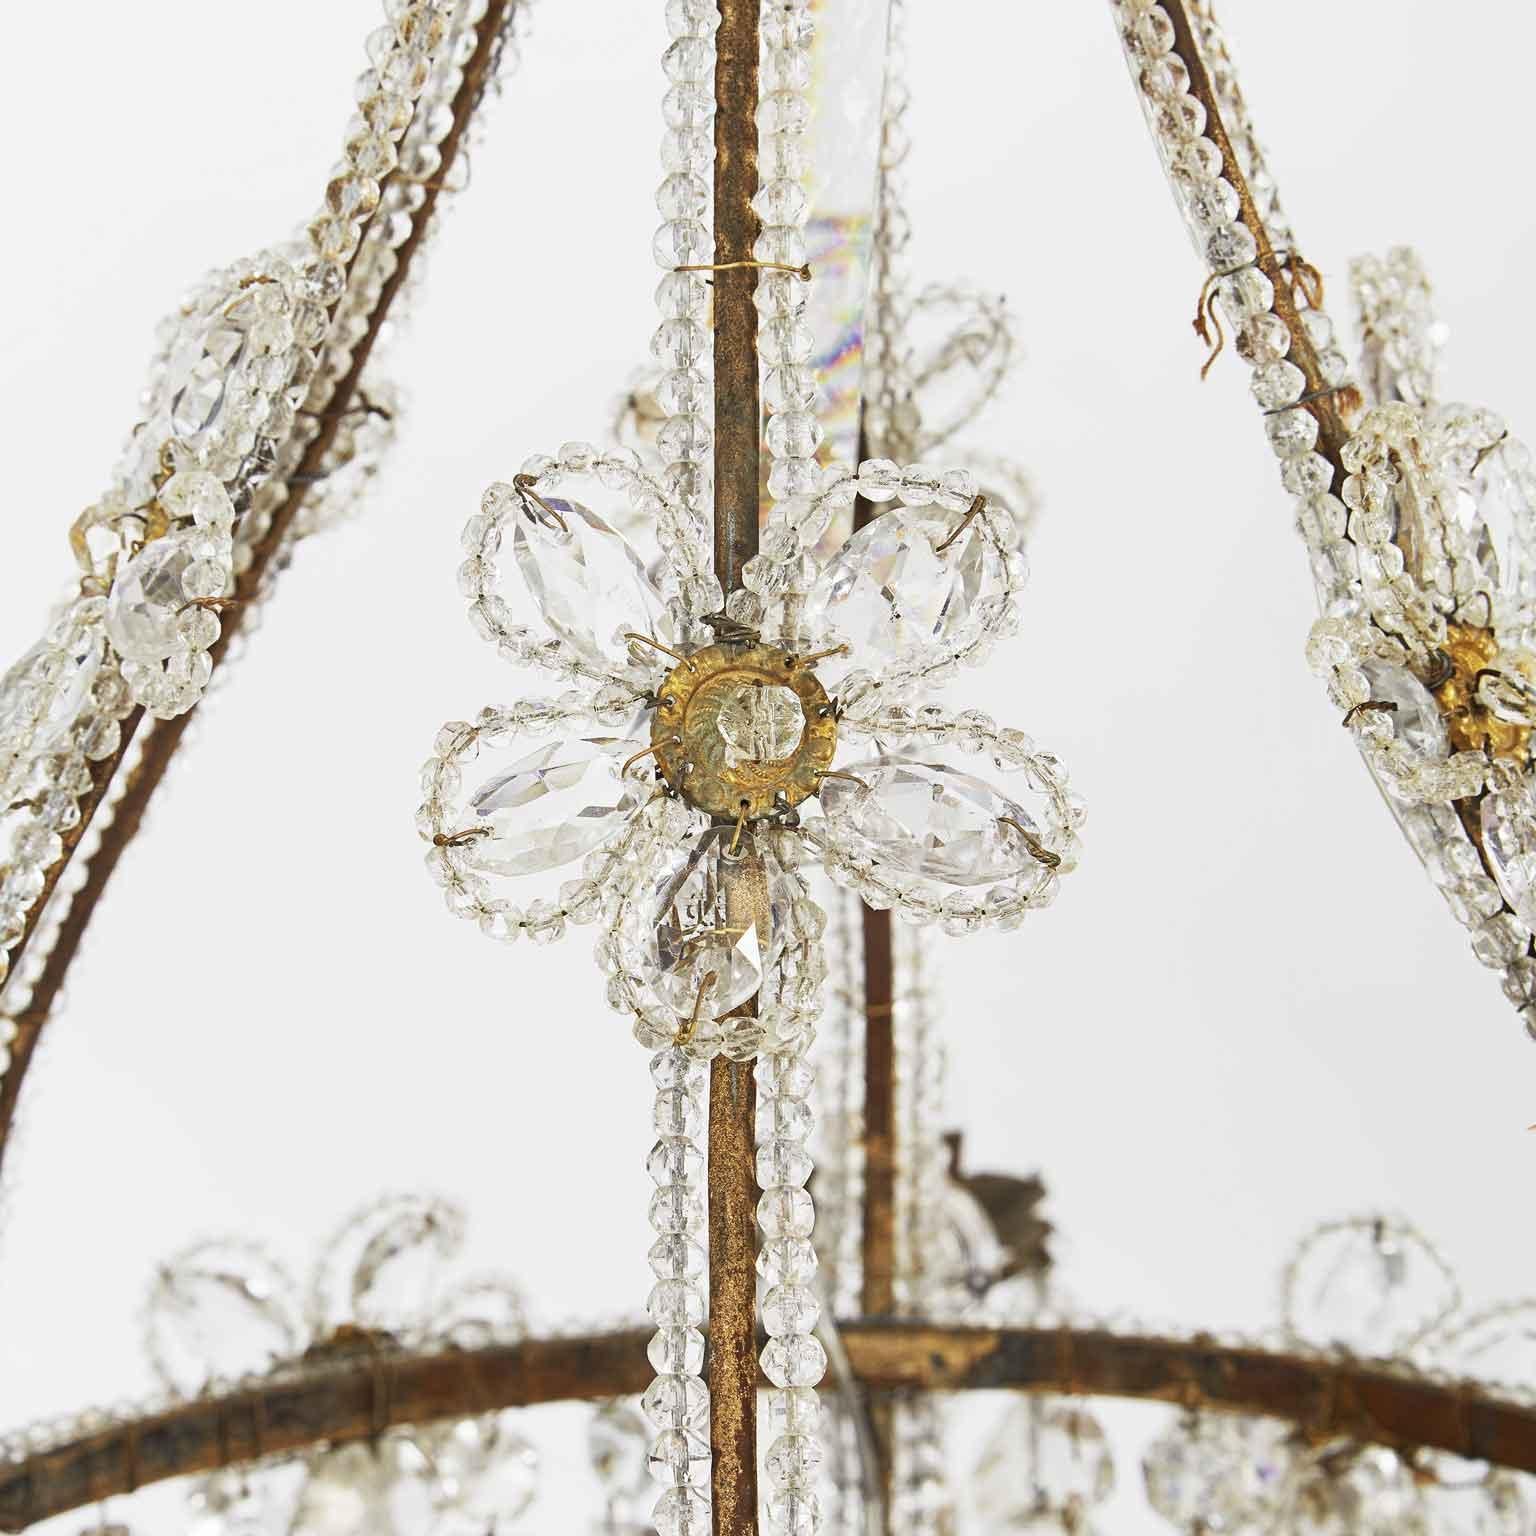 20th century Italian beaded crystal six-light chandelier, a lovely and romantic cage chandelier basket shape iron frame with gilded finish.
Six curved double beaded crystals arms ending with original flower shaped gilded iron bobeiges.

The iron